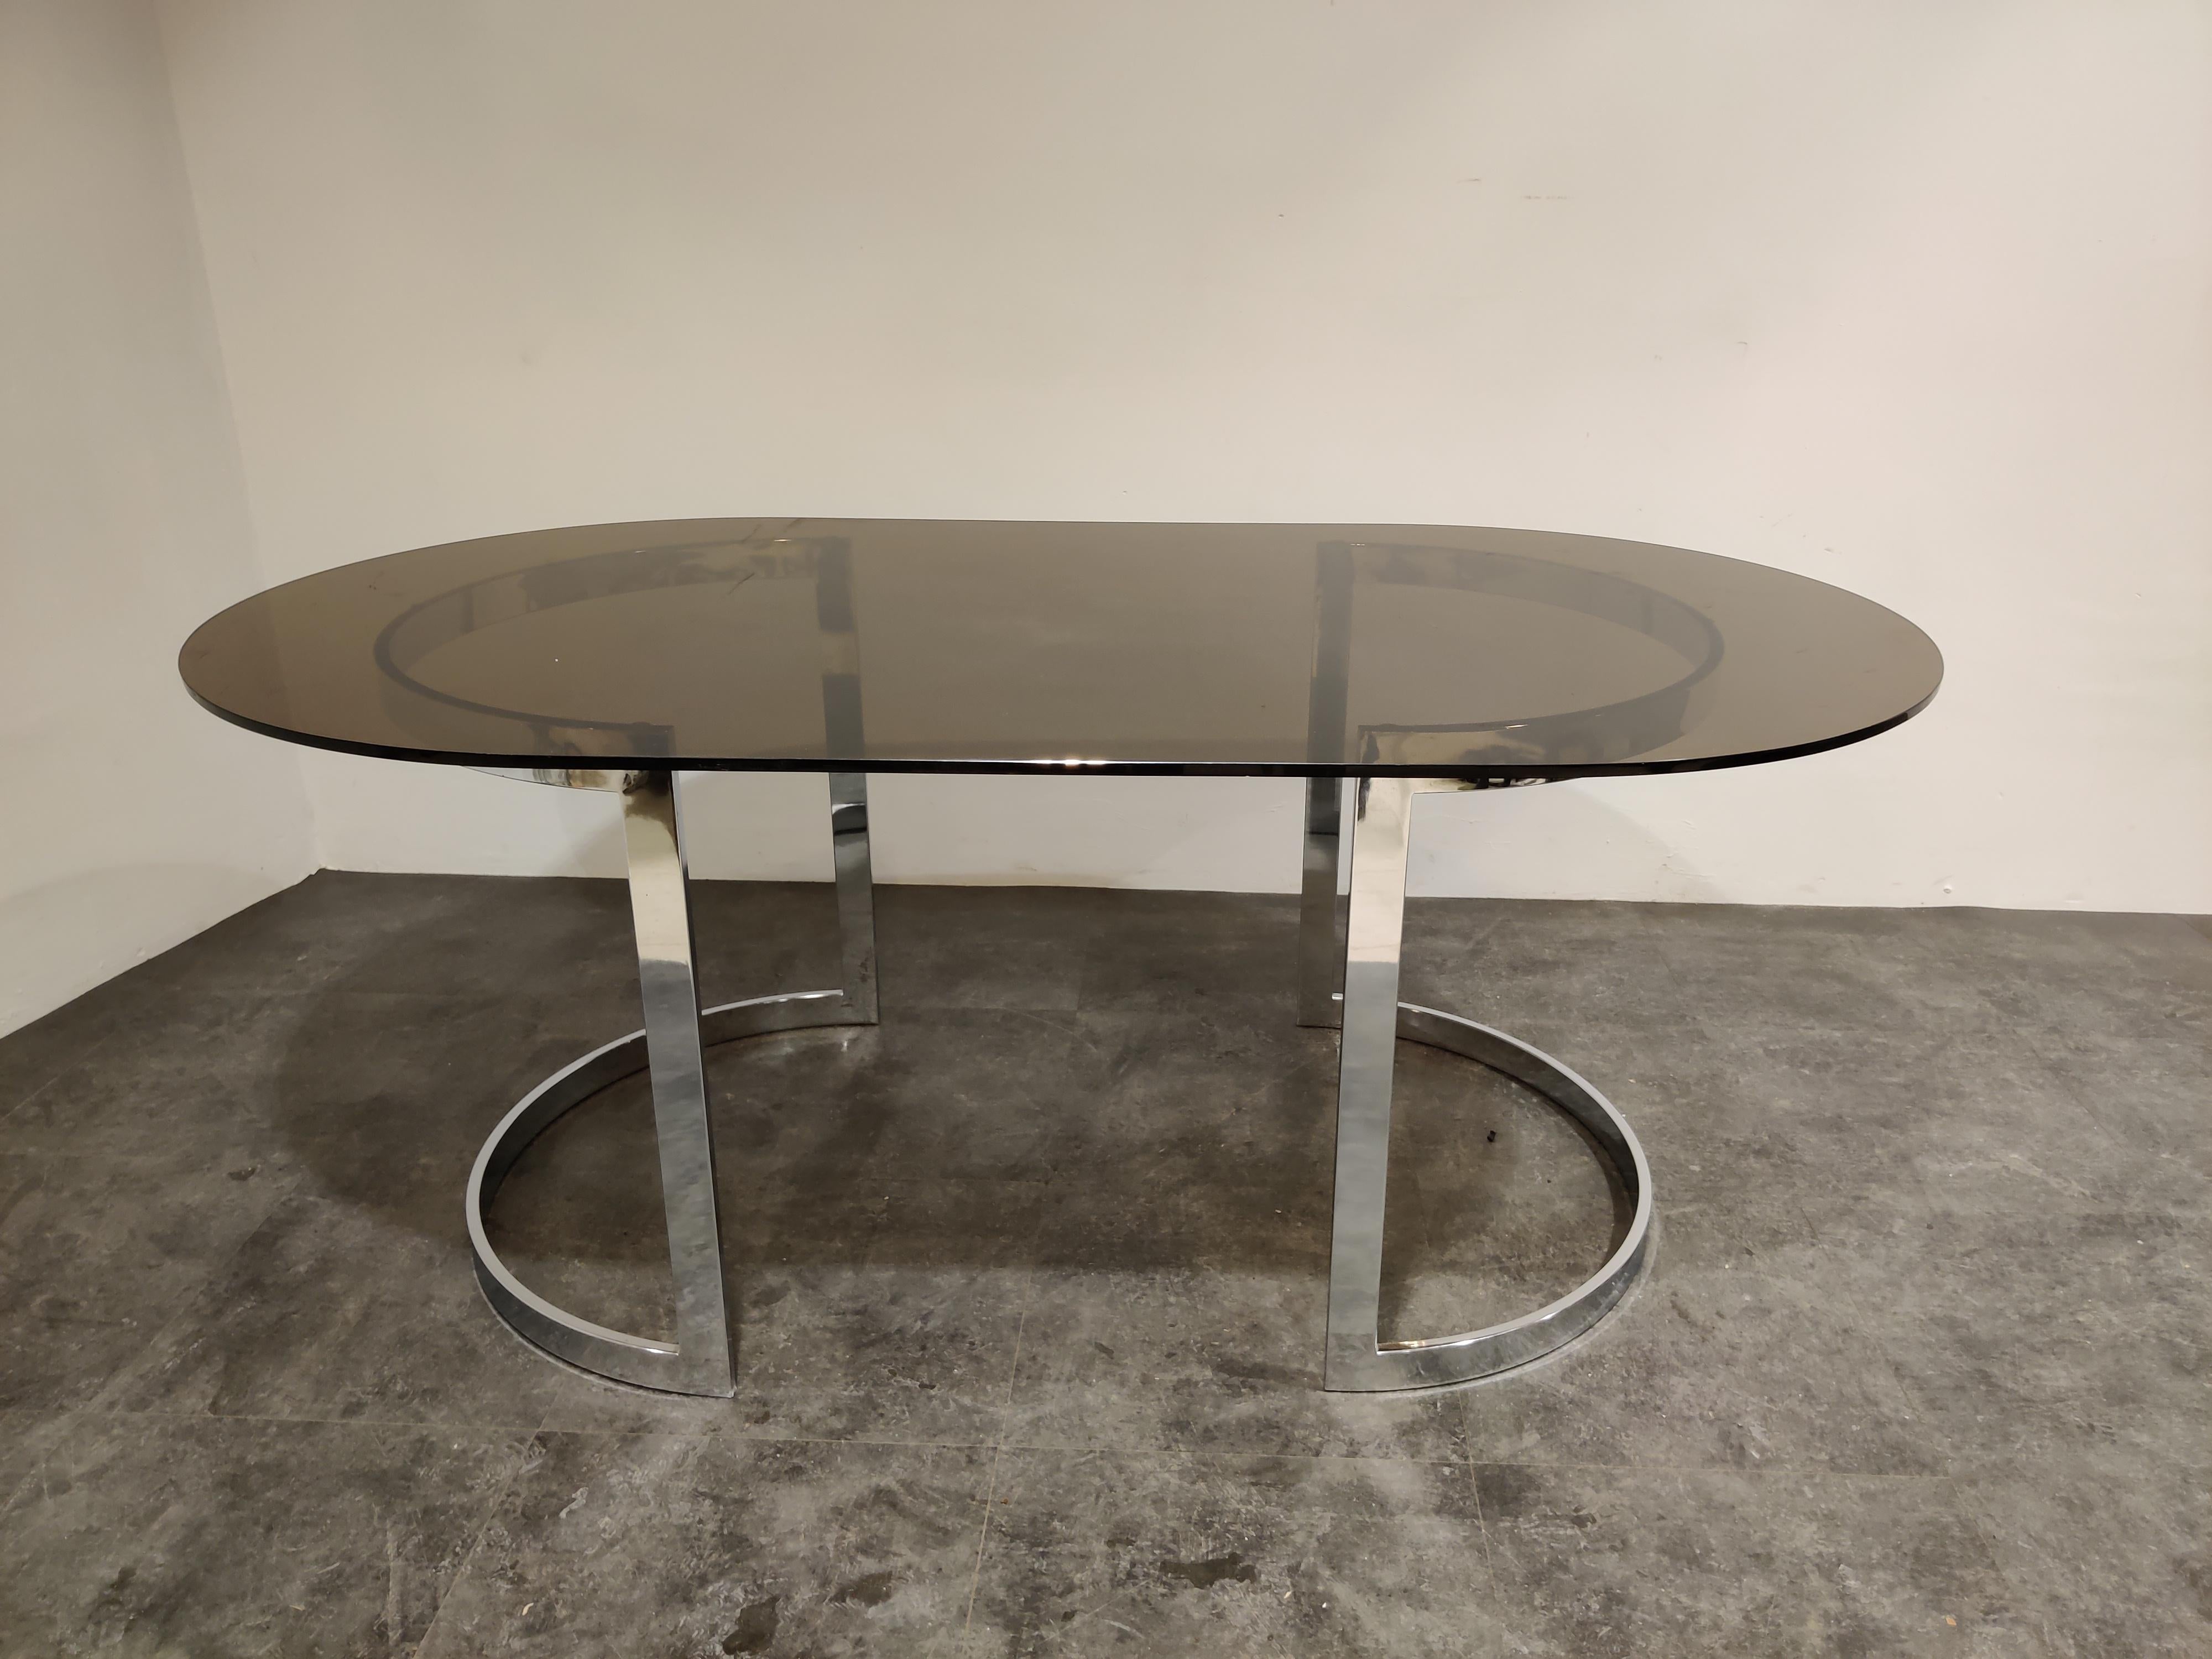 Beautiful Minimalist chromed steel dining table with an oval smoked glass top.

The bases can be placed in various ways.

Charming, timeless piece for in the kitchen or dining room.

1970s - France

Good condition
 
Measures: Height: